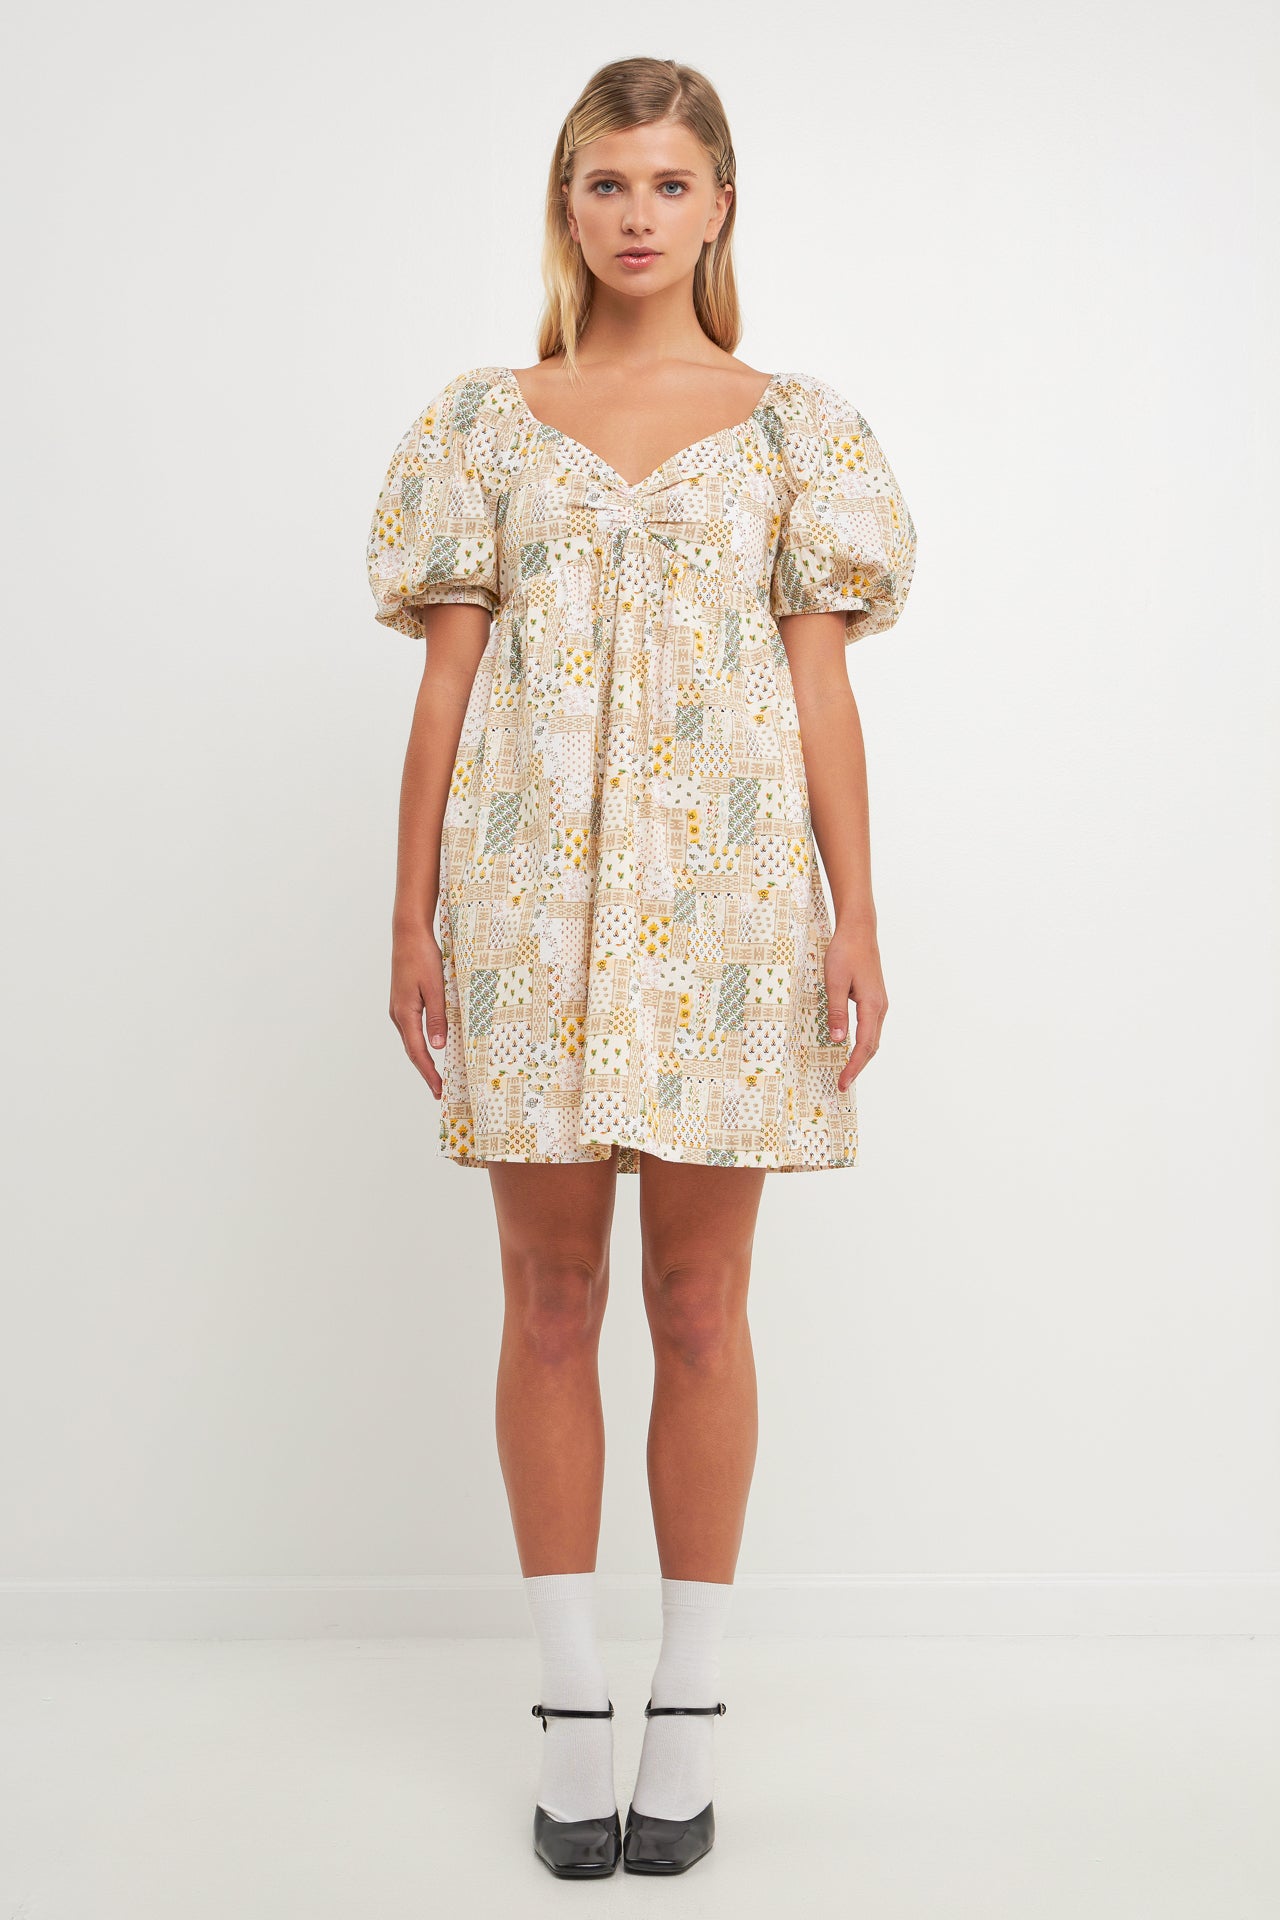 FREE THE ROSES - Printed Babydoll Mini Dress - DRESSES available at Objectrare